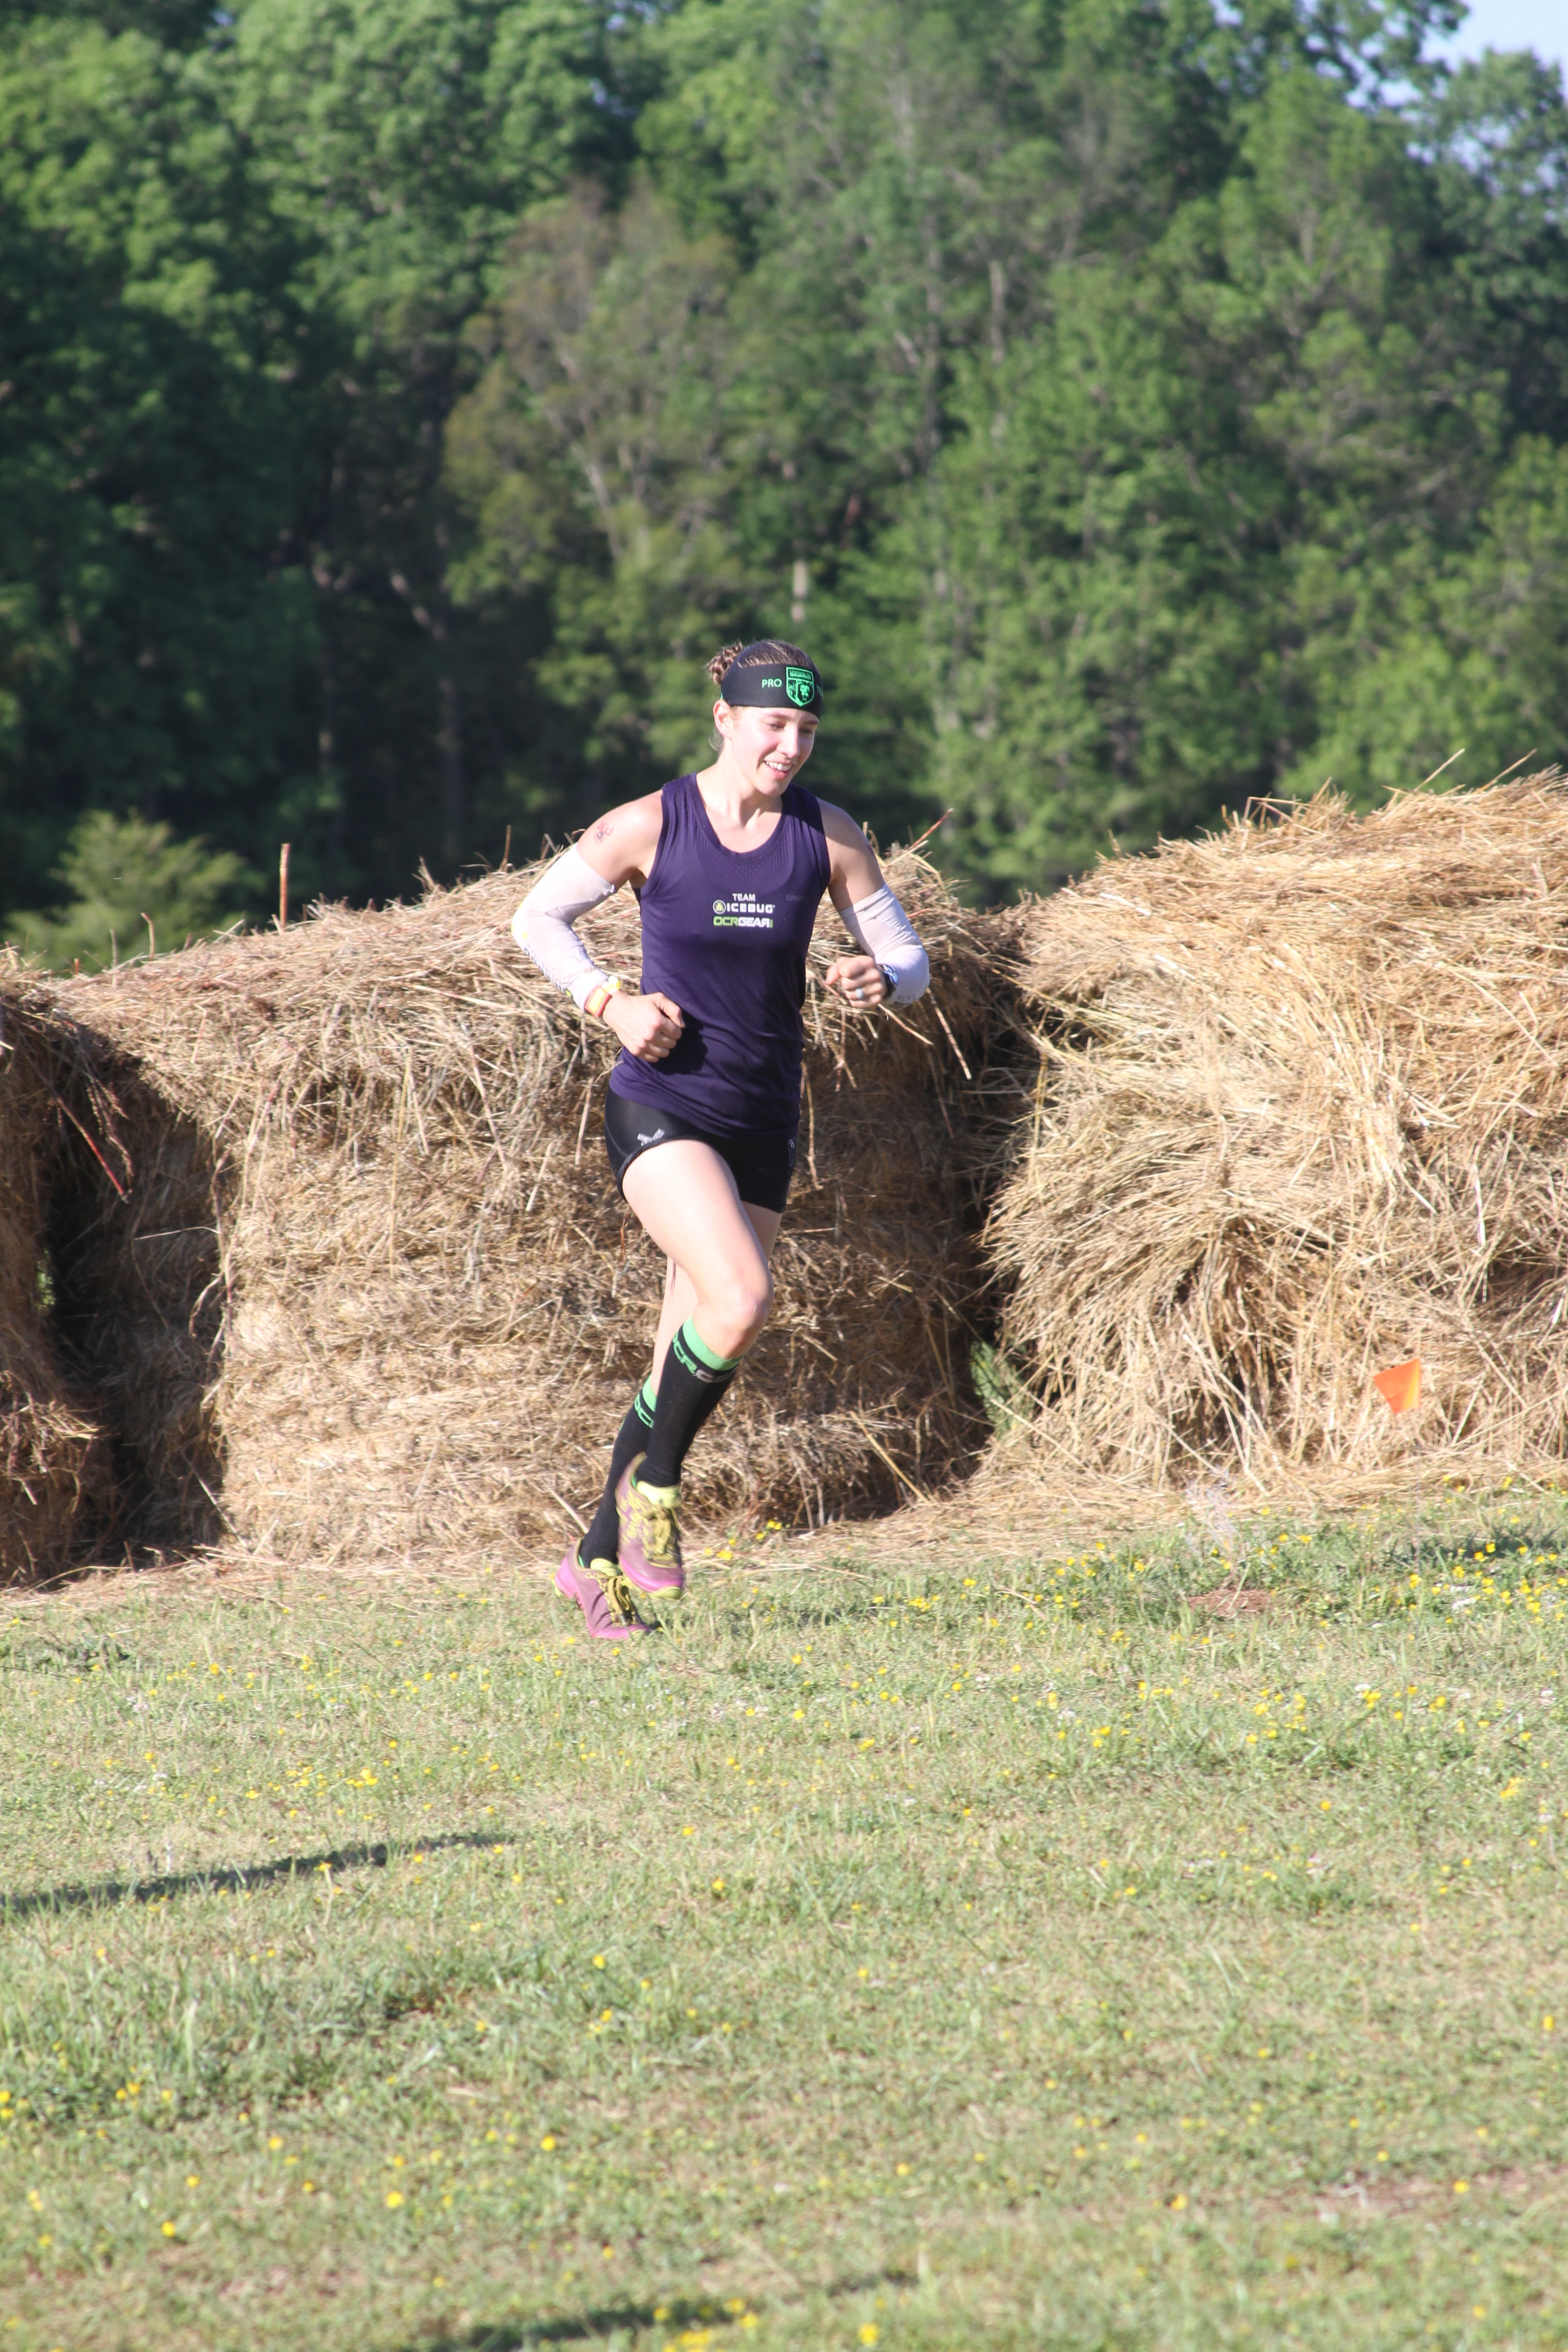 CTG Pro Team Member Amy "Magic" Pajcic clearing hay bales on her way to 3rd spot on the podium.